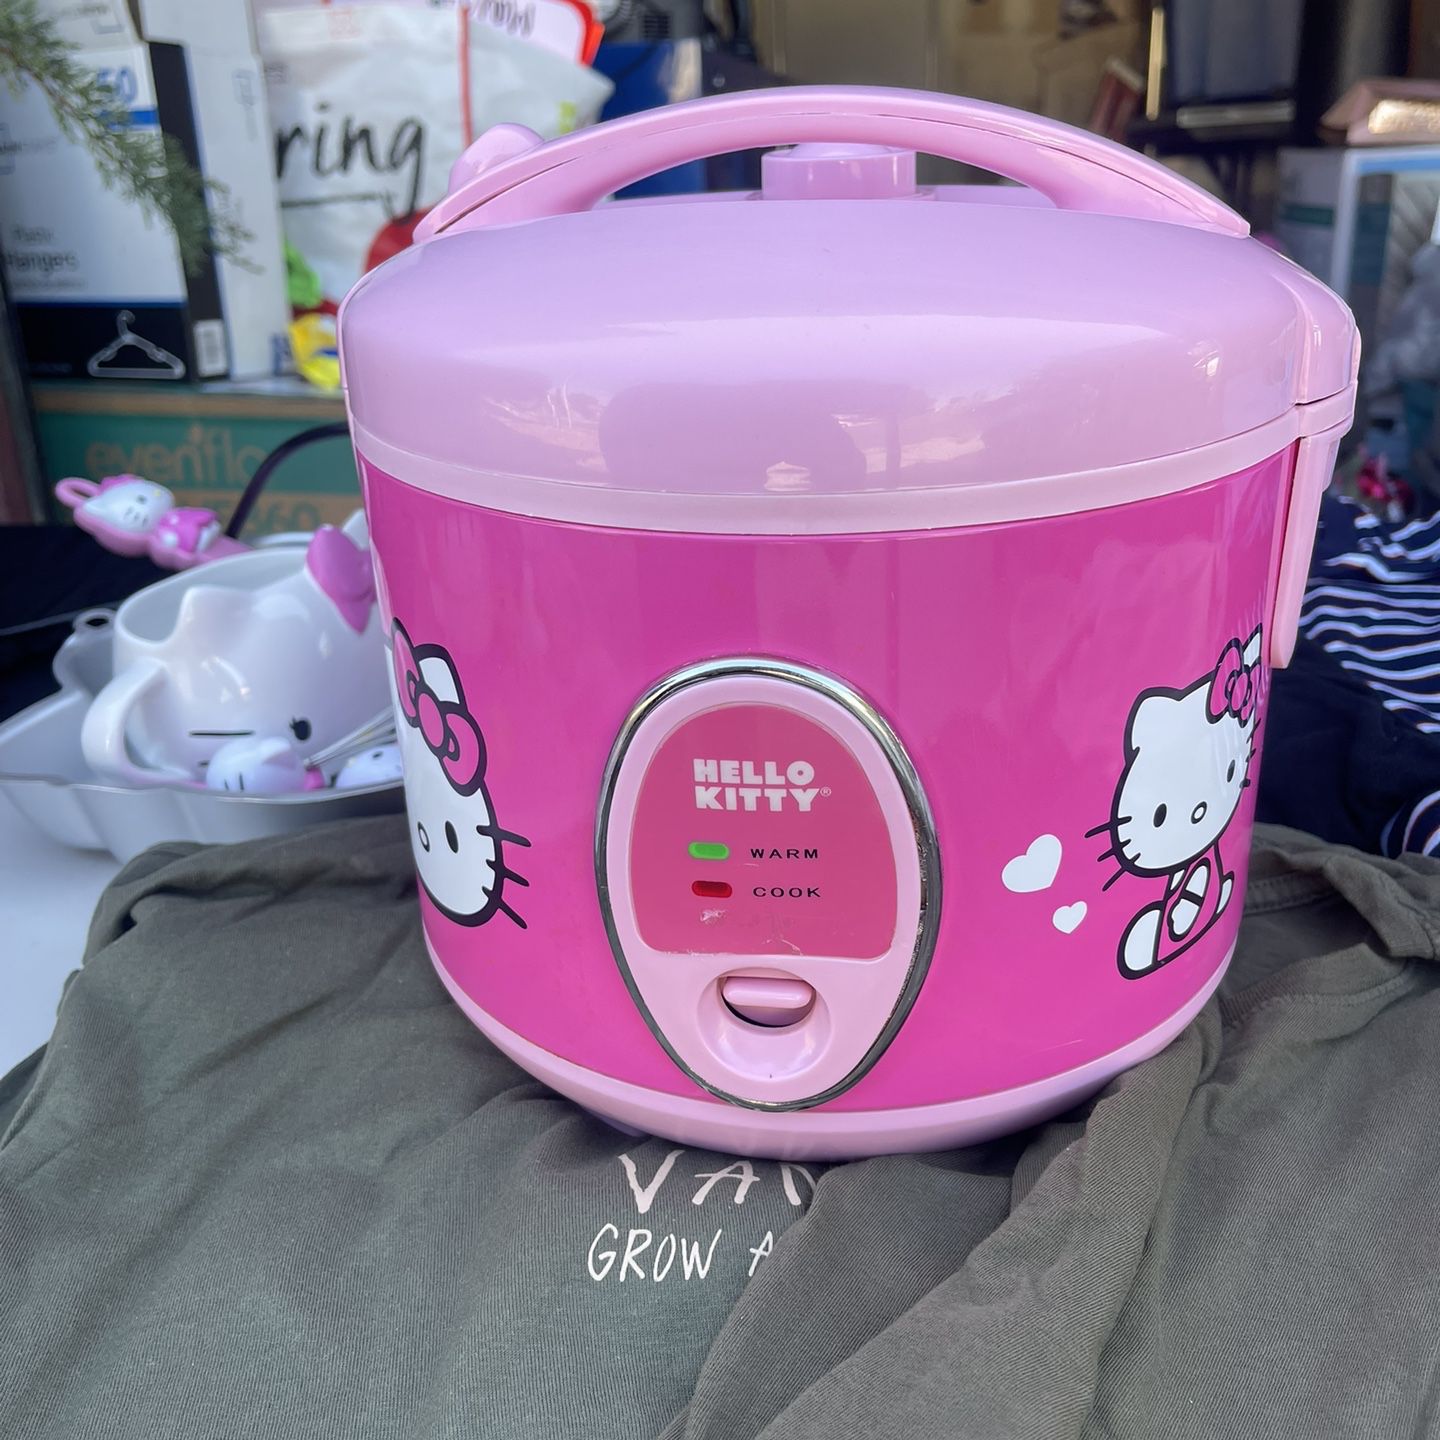 Hello Kitty Rice Maker for Sale in Palmdale, CA - OfferUp